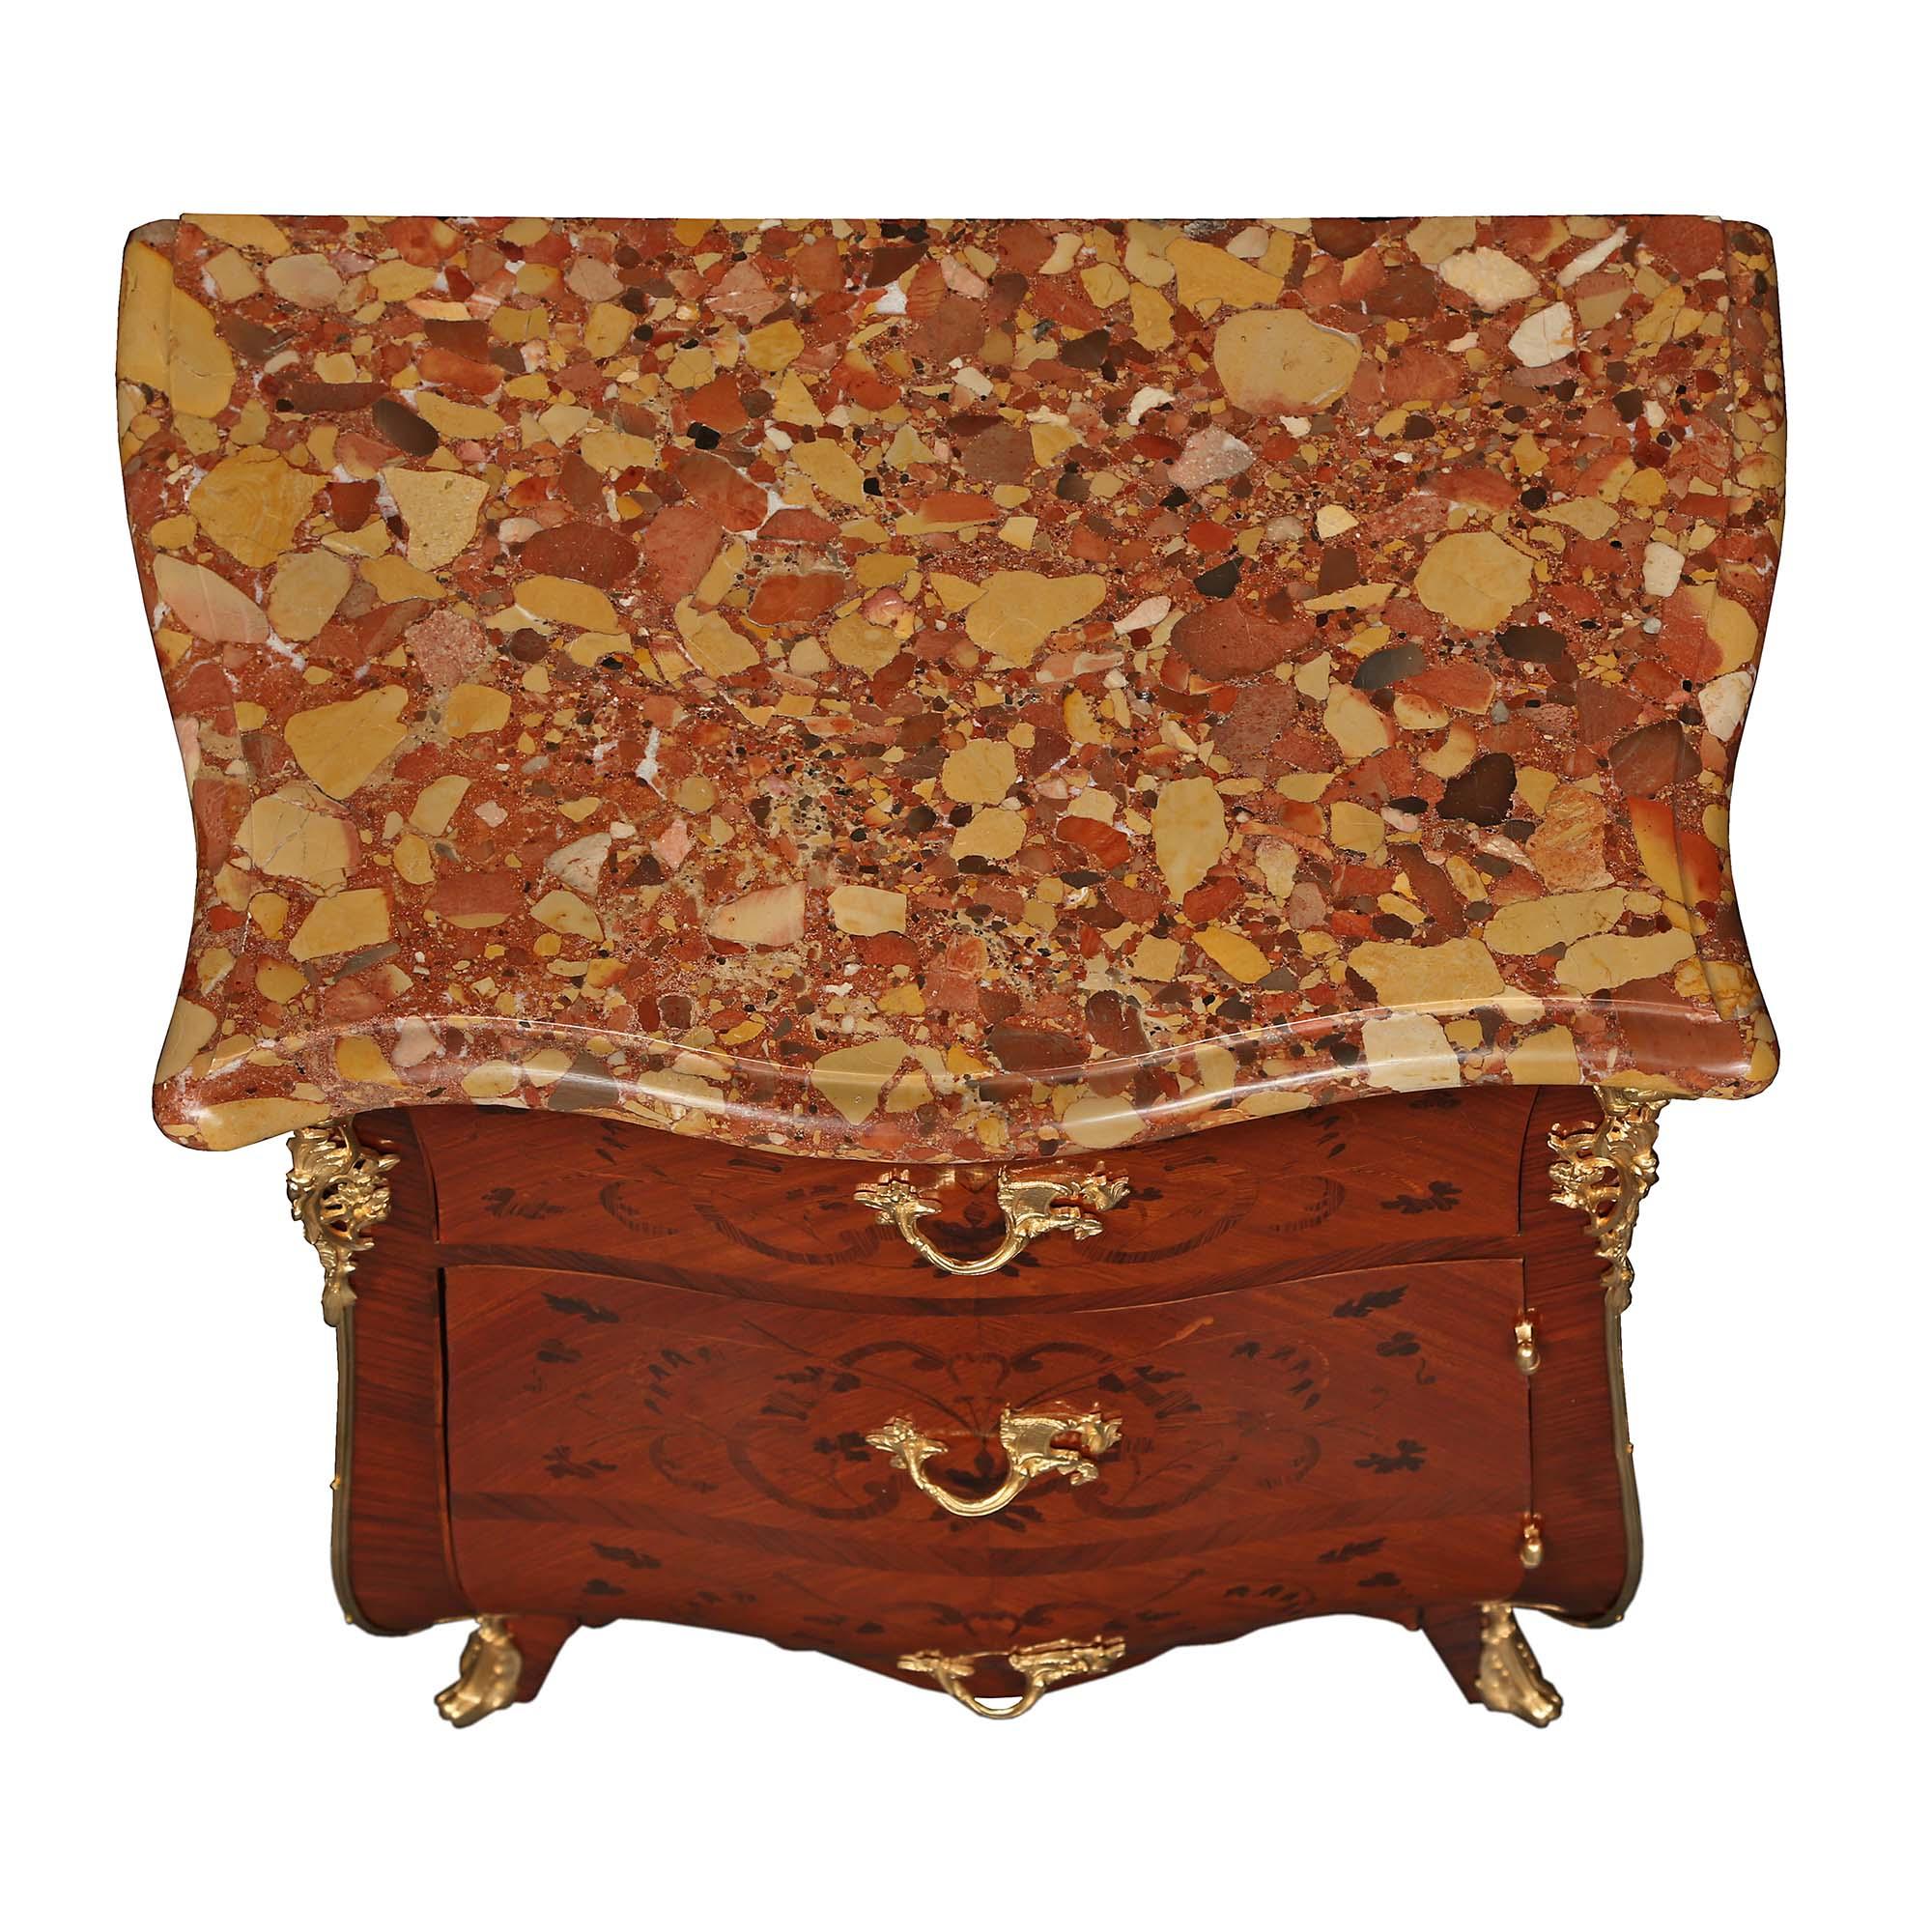 A lovely pair of French 19th century Louis XV style kingwood and tulipwood marquetry bombée chests. Each chest is raised by short cabriole legs with fine ormolu sabots that lead up to elegant richly chased pierced ormolu foliate corner mounts. The